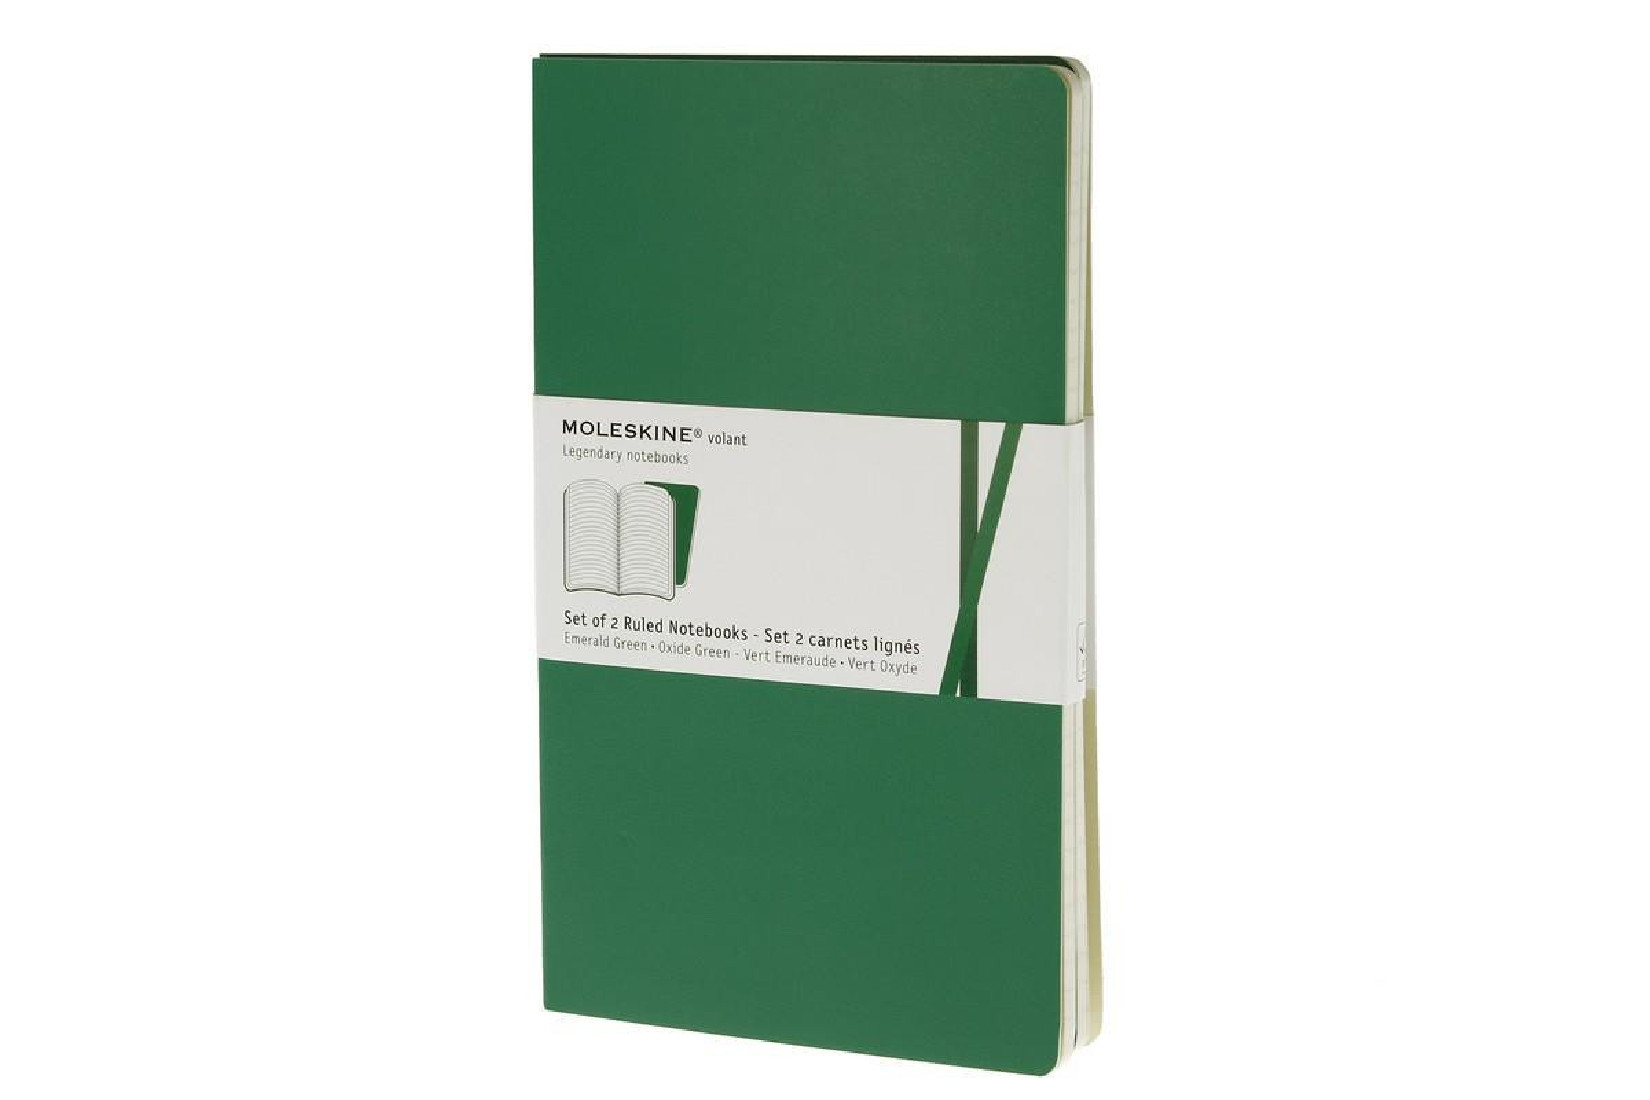 Set of 2 Ruled Journals Green Soft Cover Large 13x21 Moleskine